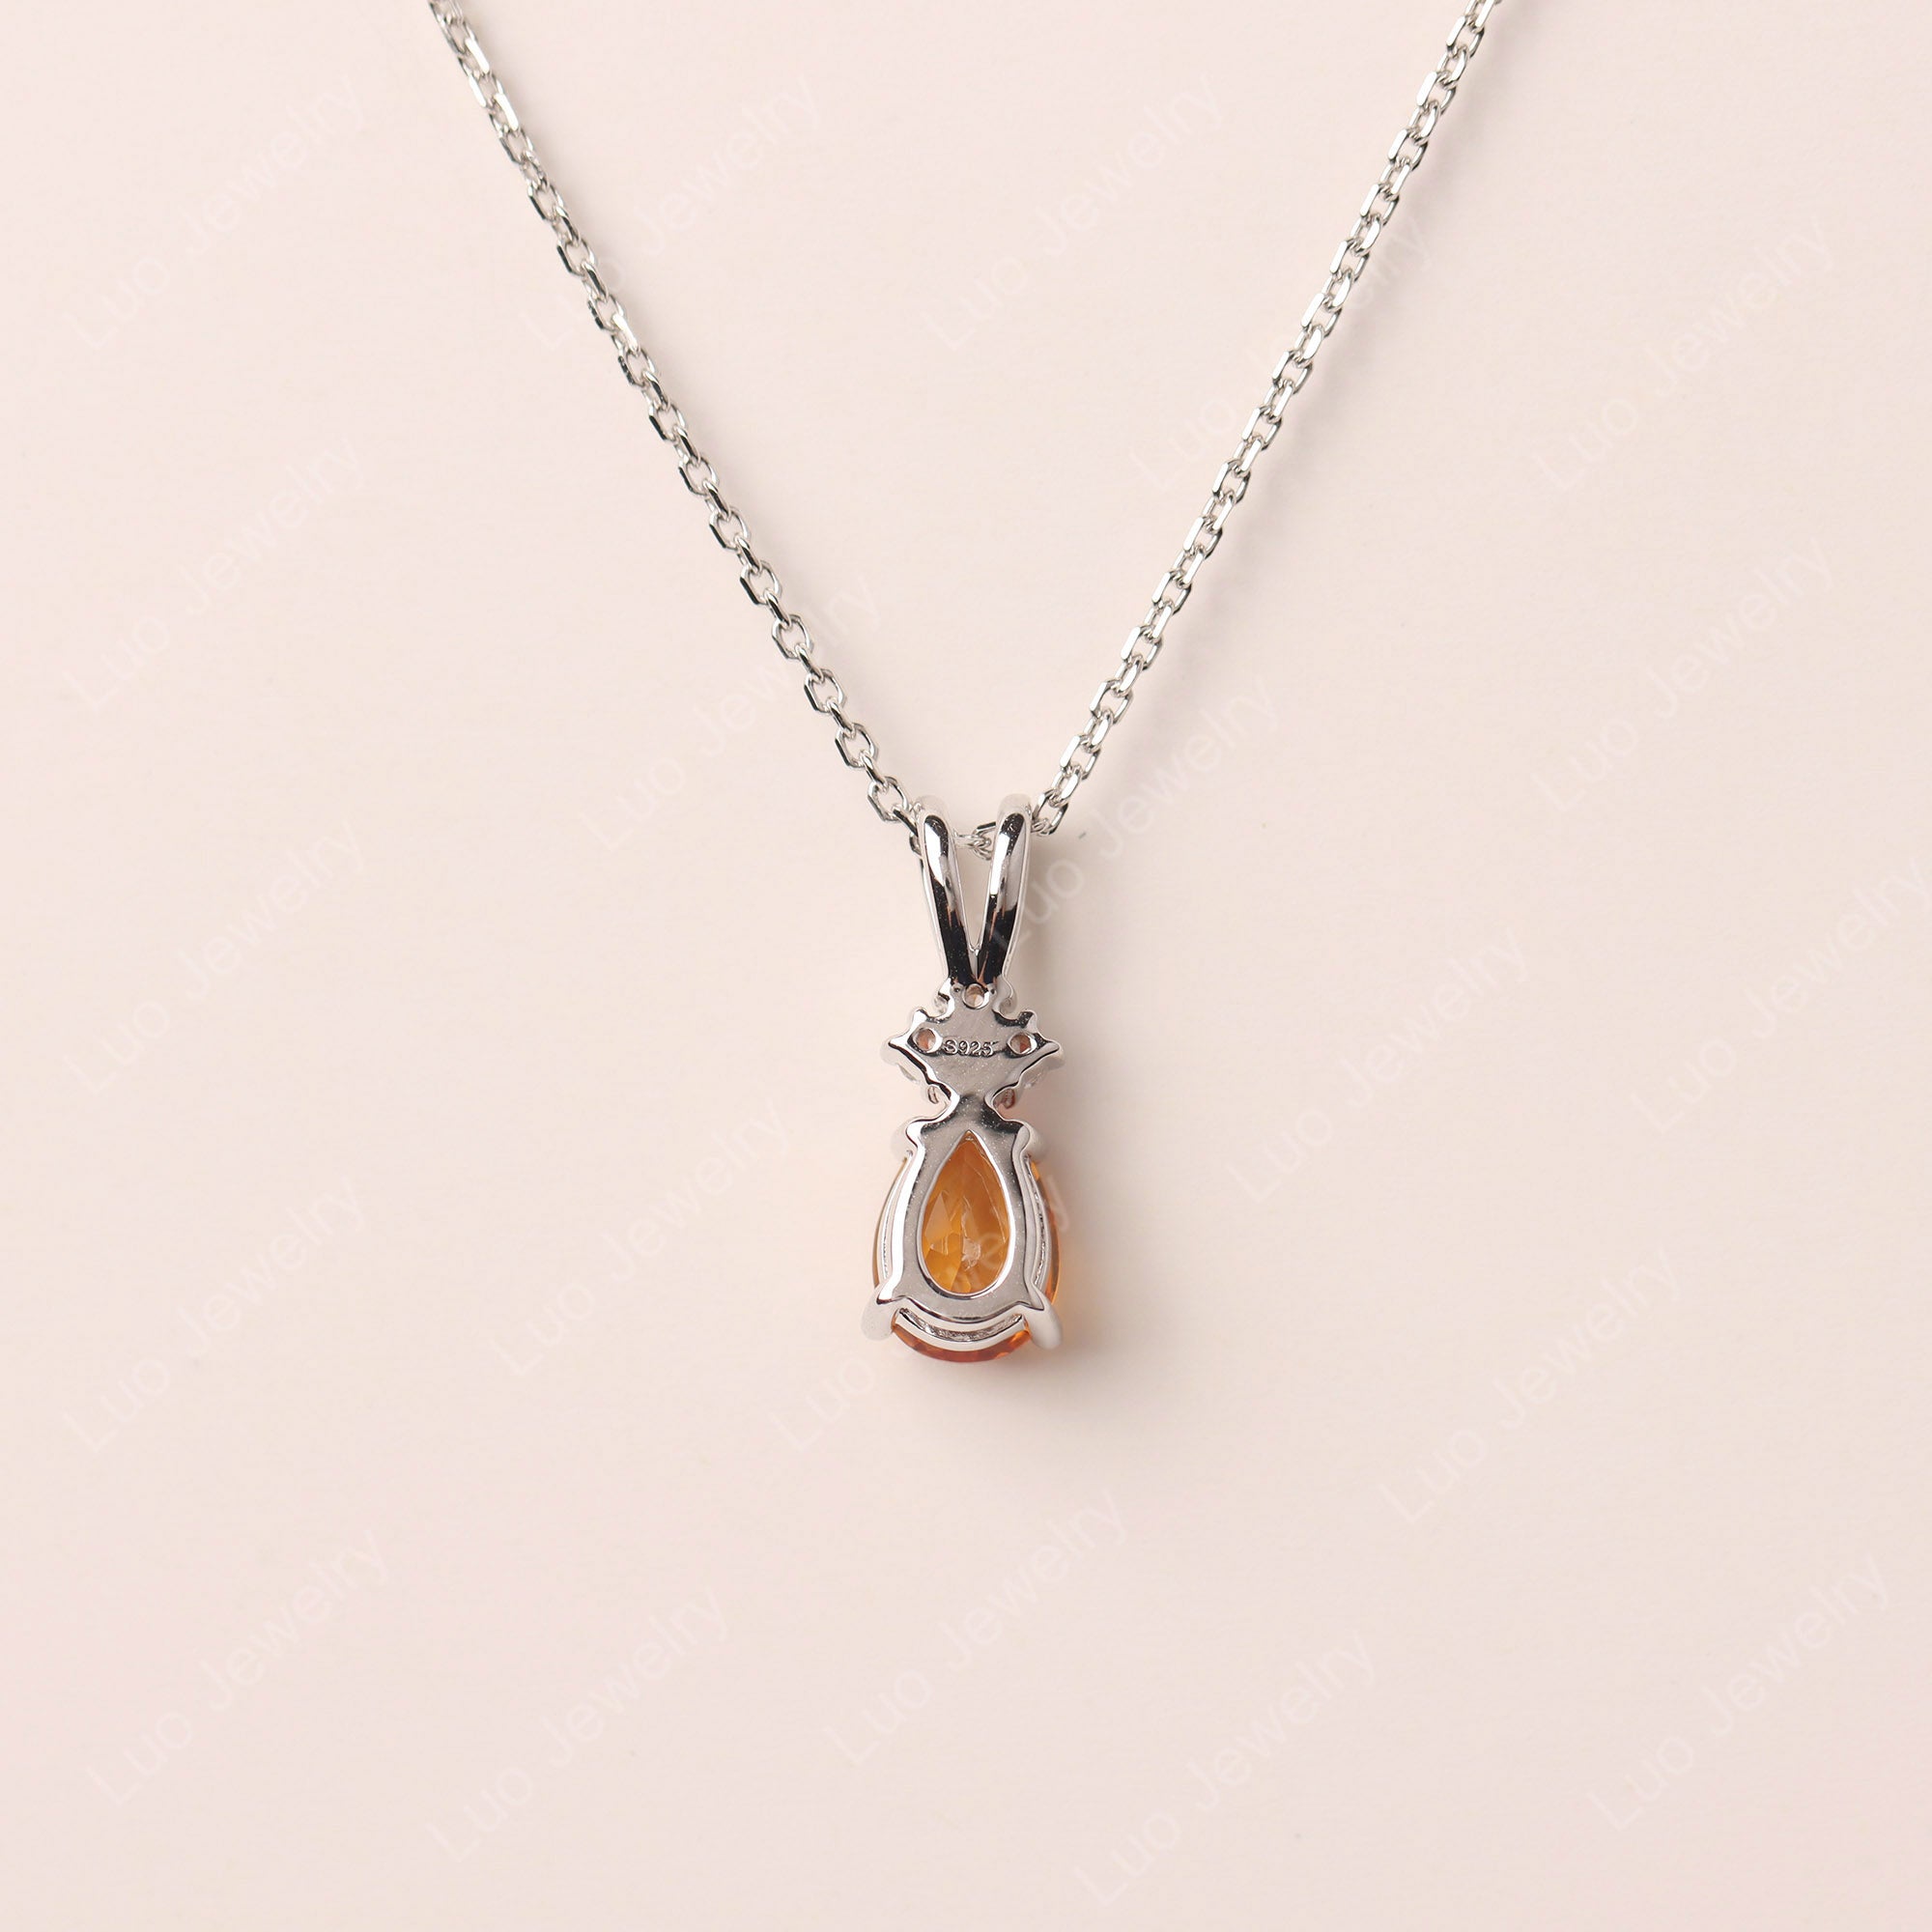 Pear Shaped Citrine Necklace